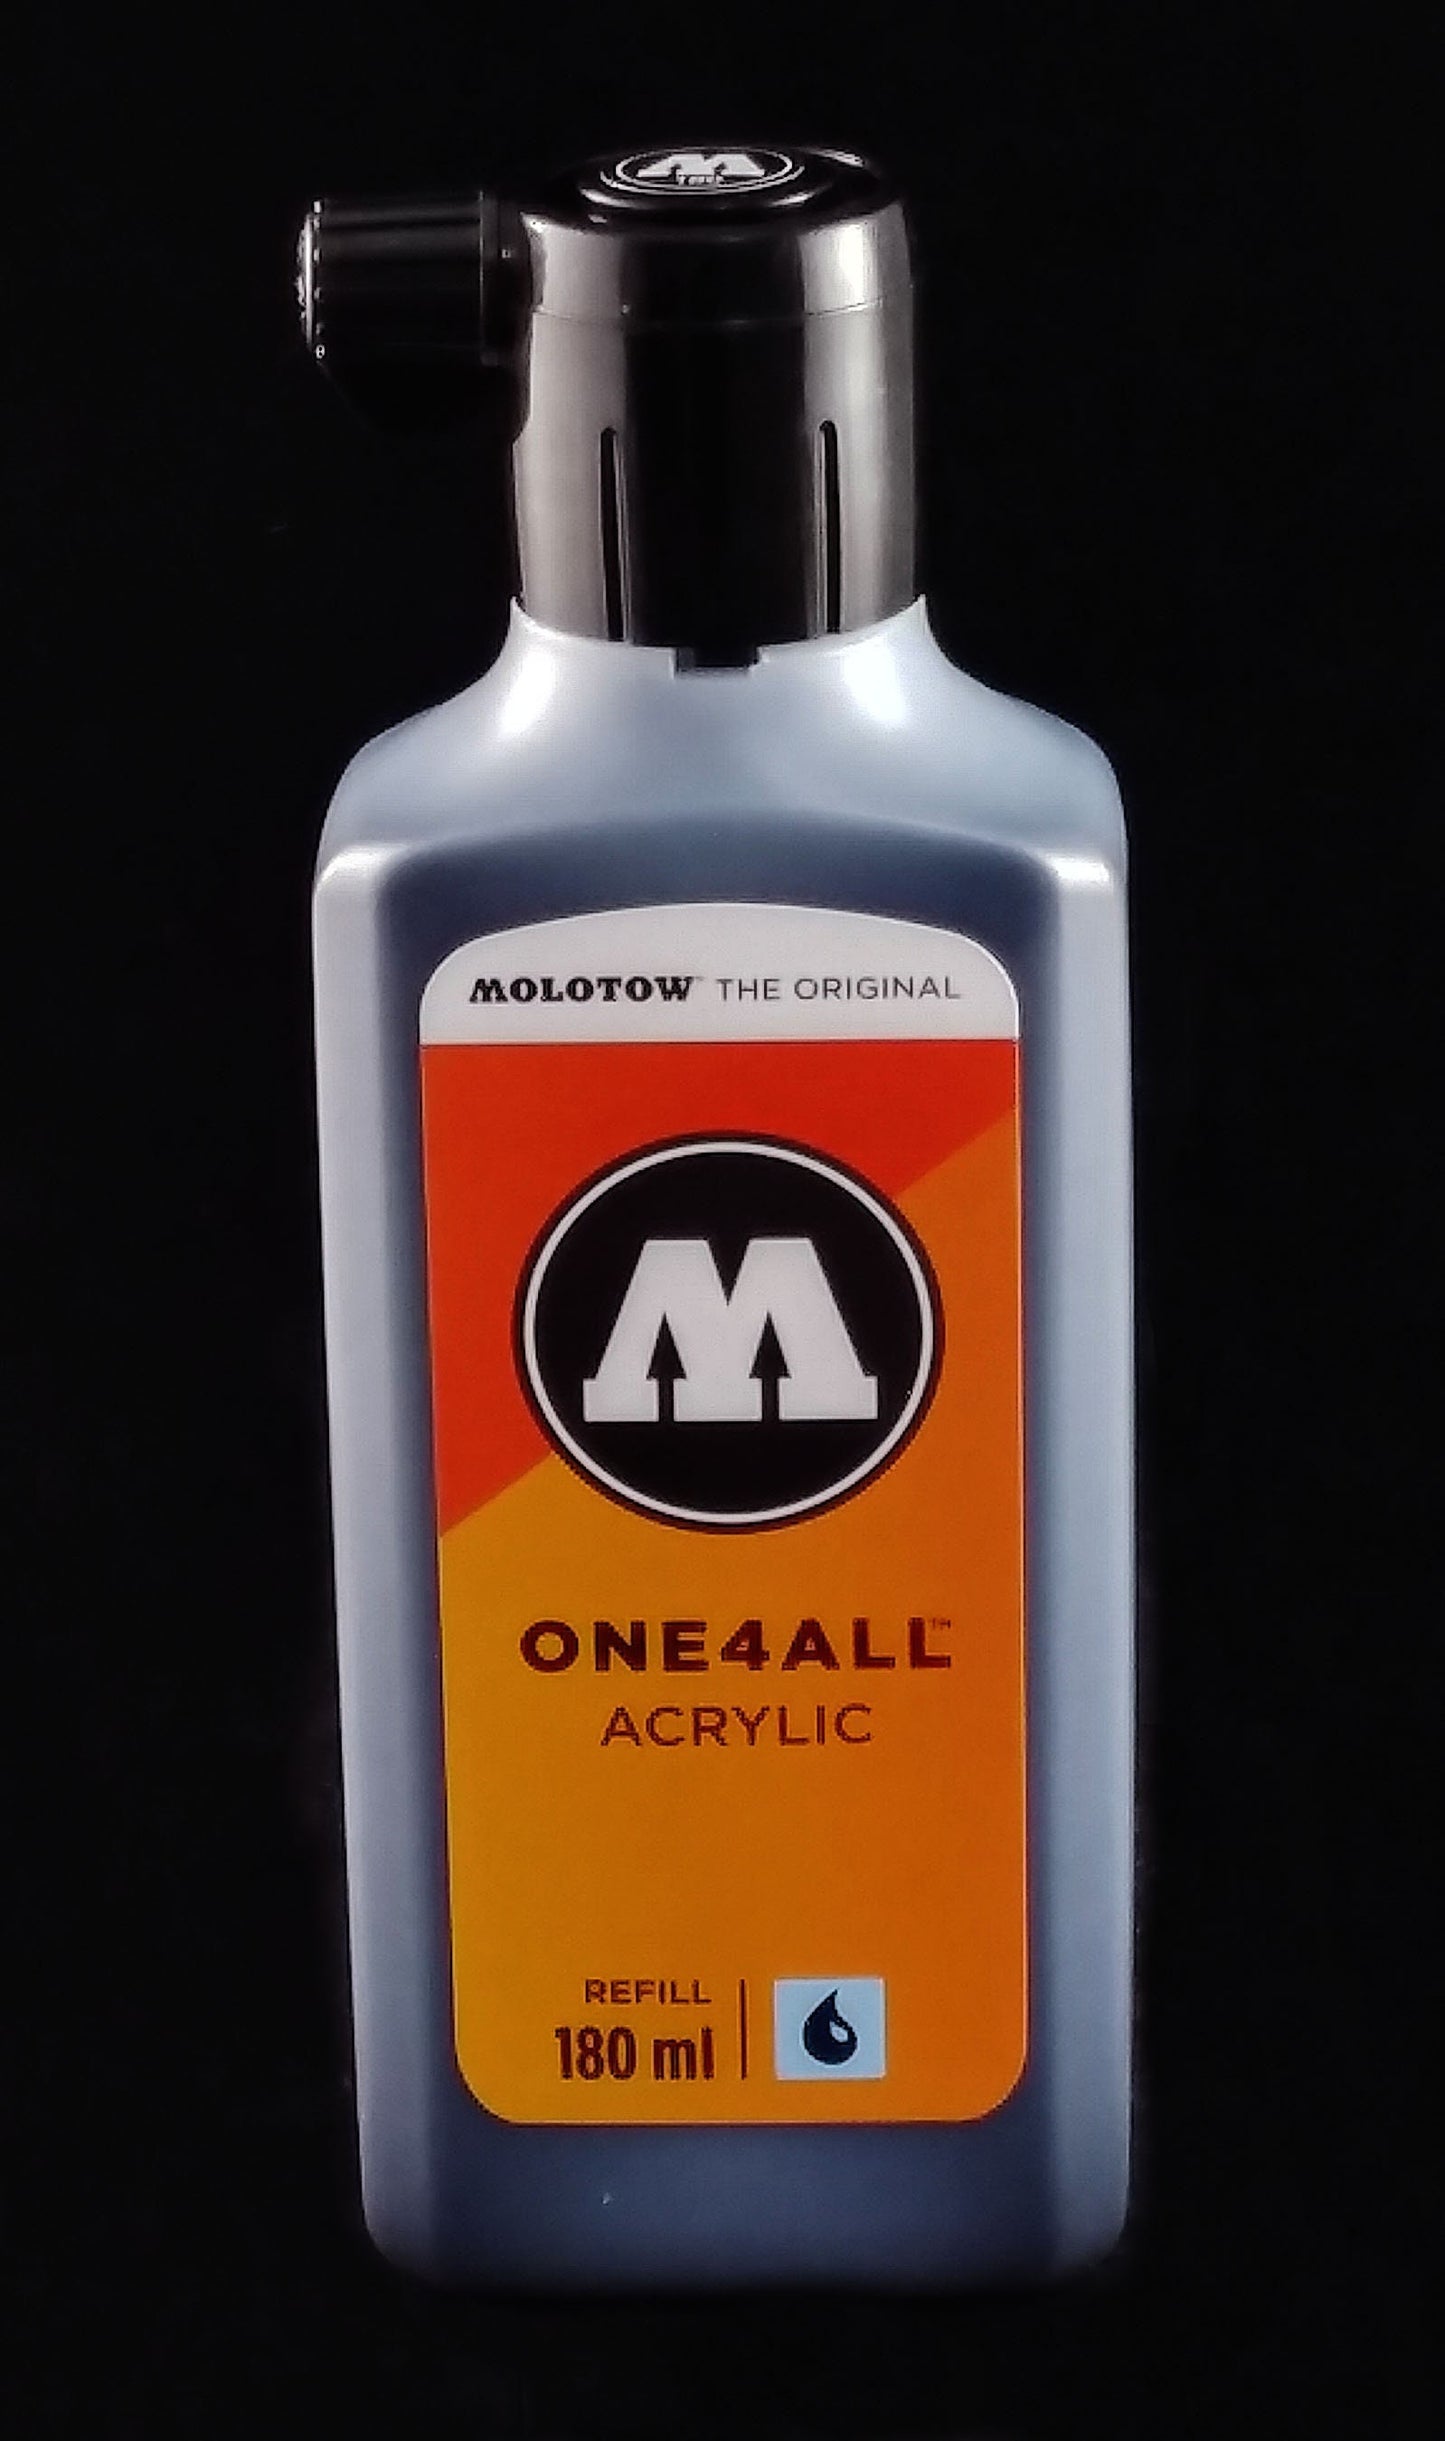 30ml One-For-All Refill for Molotow Acrylic Paint Markers